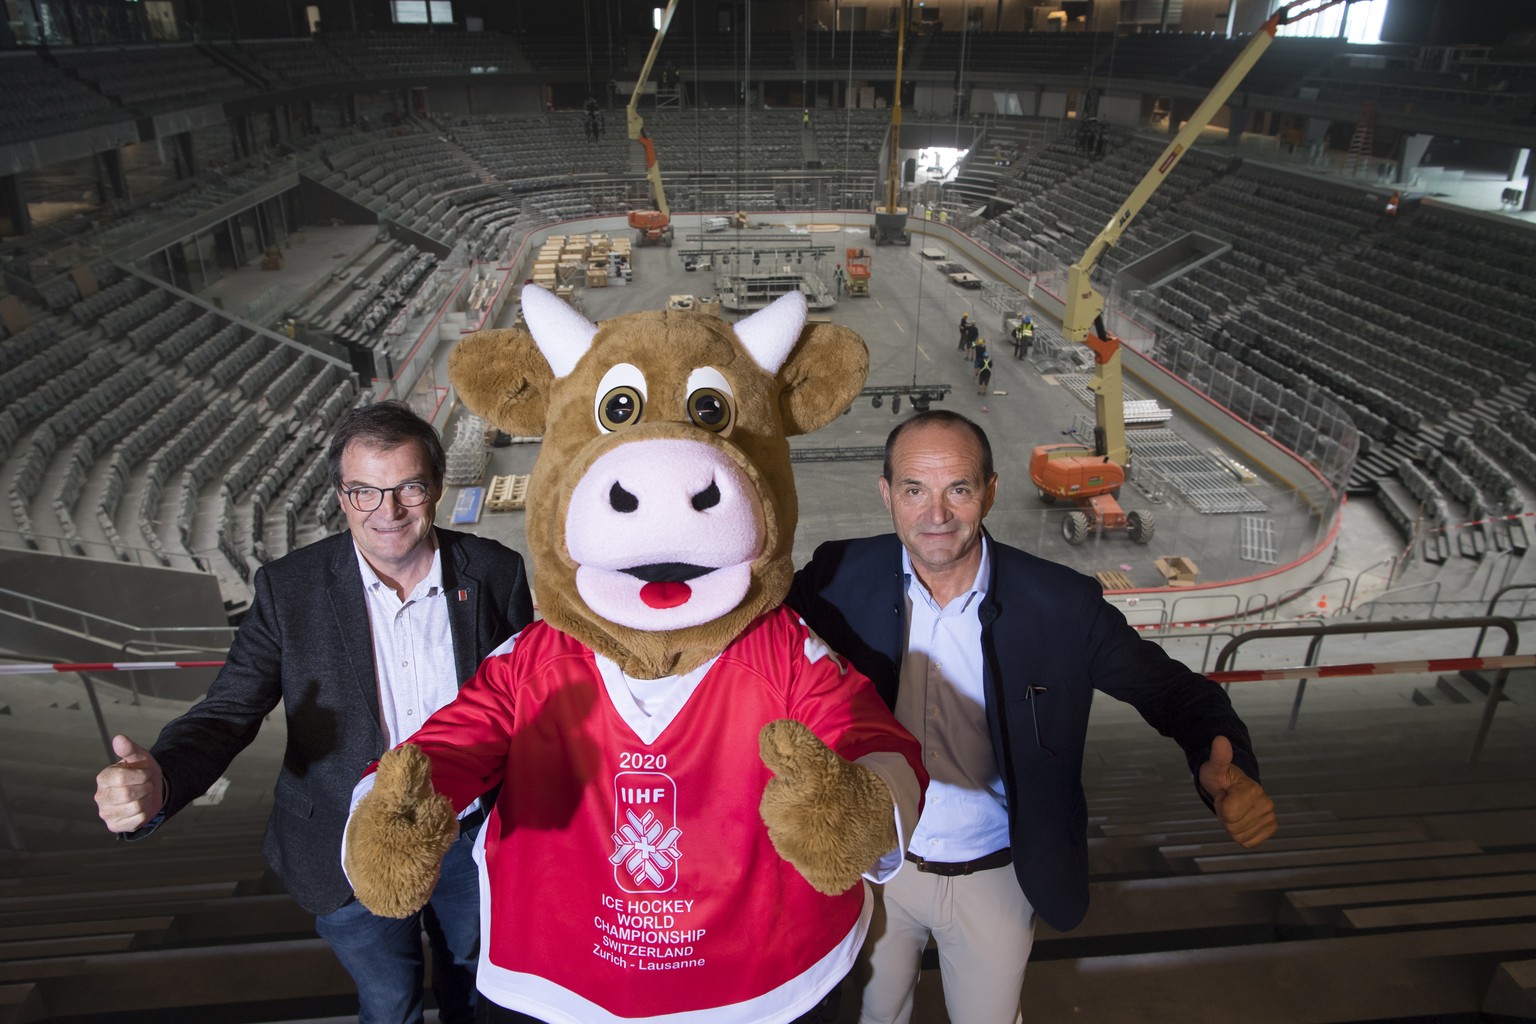 Gian Gilli, right, General Secretary of the 2020 IIHF Ice Hockey World Championship and Jean-Marie Viaccoz, left, President of the 2020 IIHF Ice Hockey World Championship pose with Cooly, the official ...